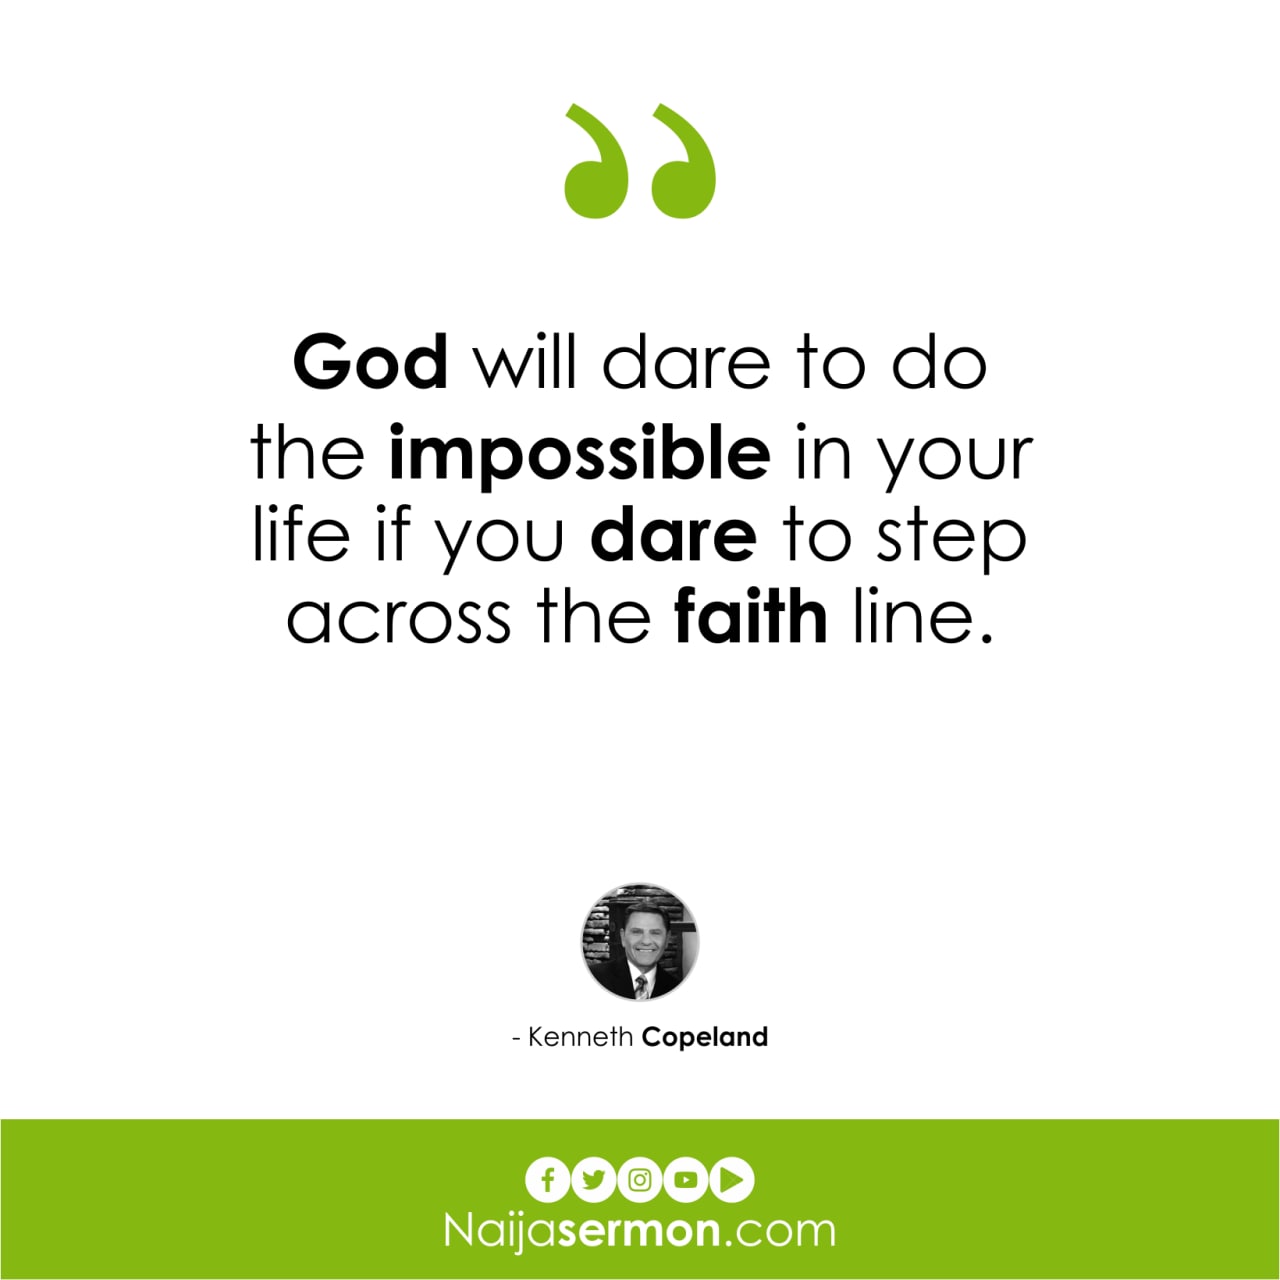 QUOTE OF THE DAY BY KENNETH COPELAND 1